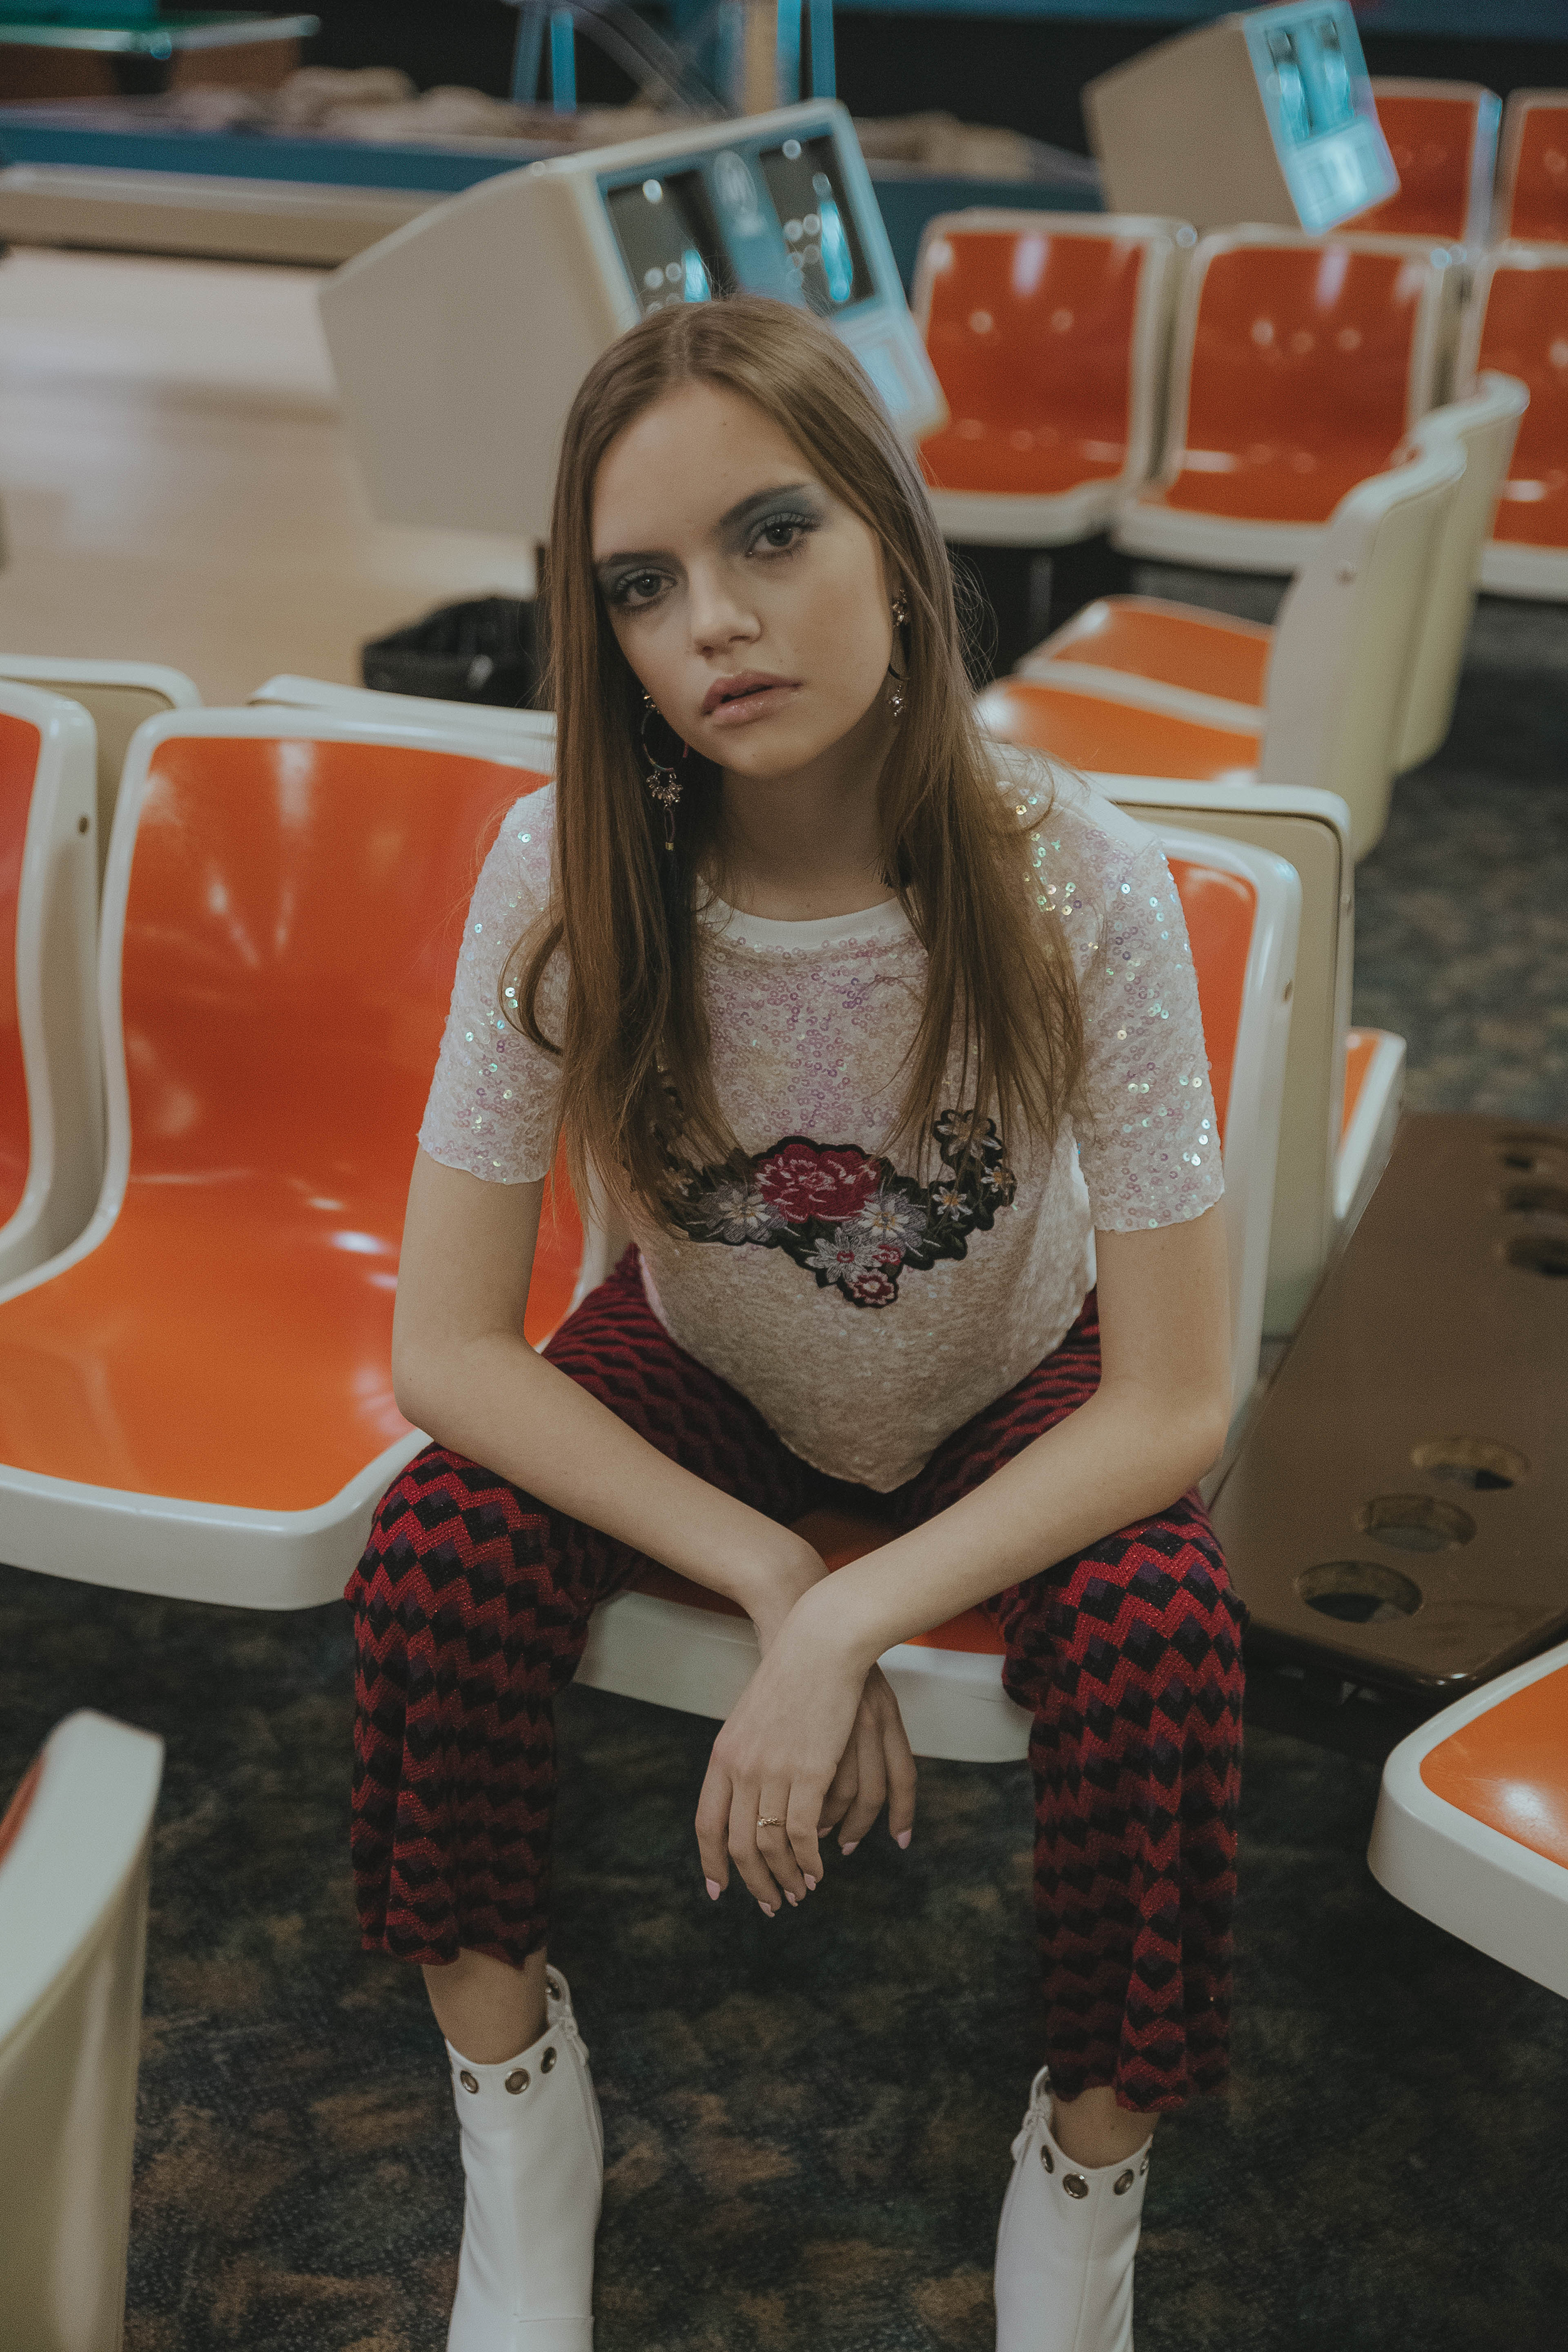 Edge Of Seventeen - Editorial by Marie-Eve Rose